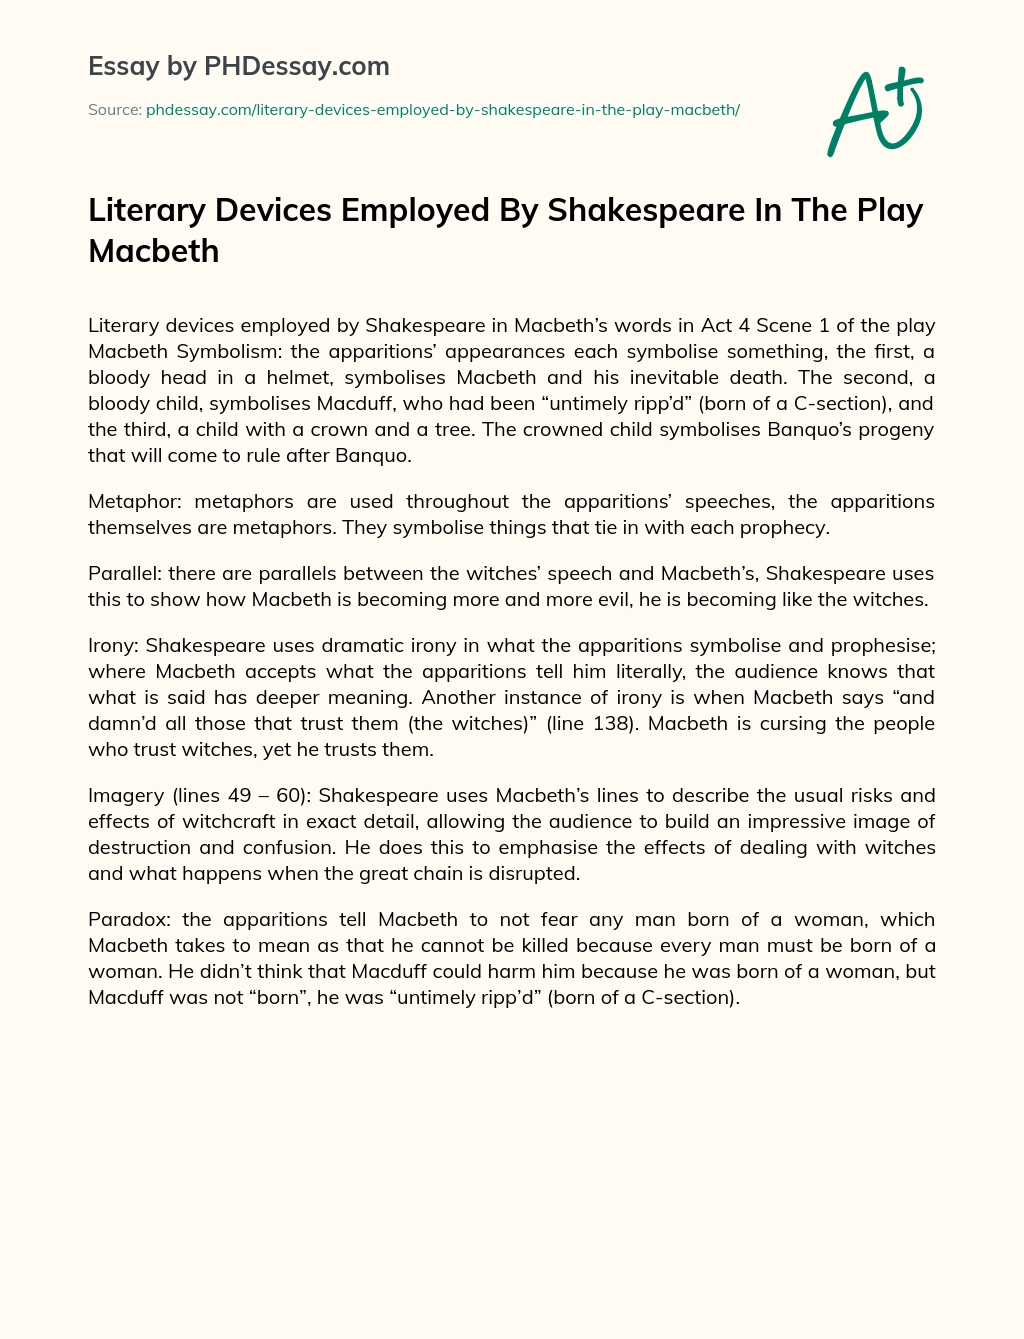 Literary Devices Employed By Shakespeare In The Play Macbeth essay